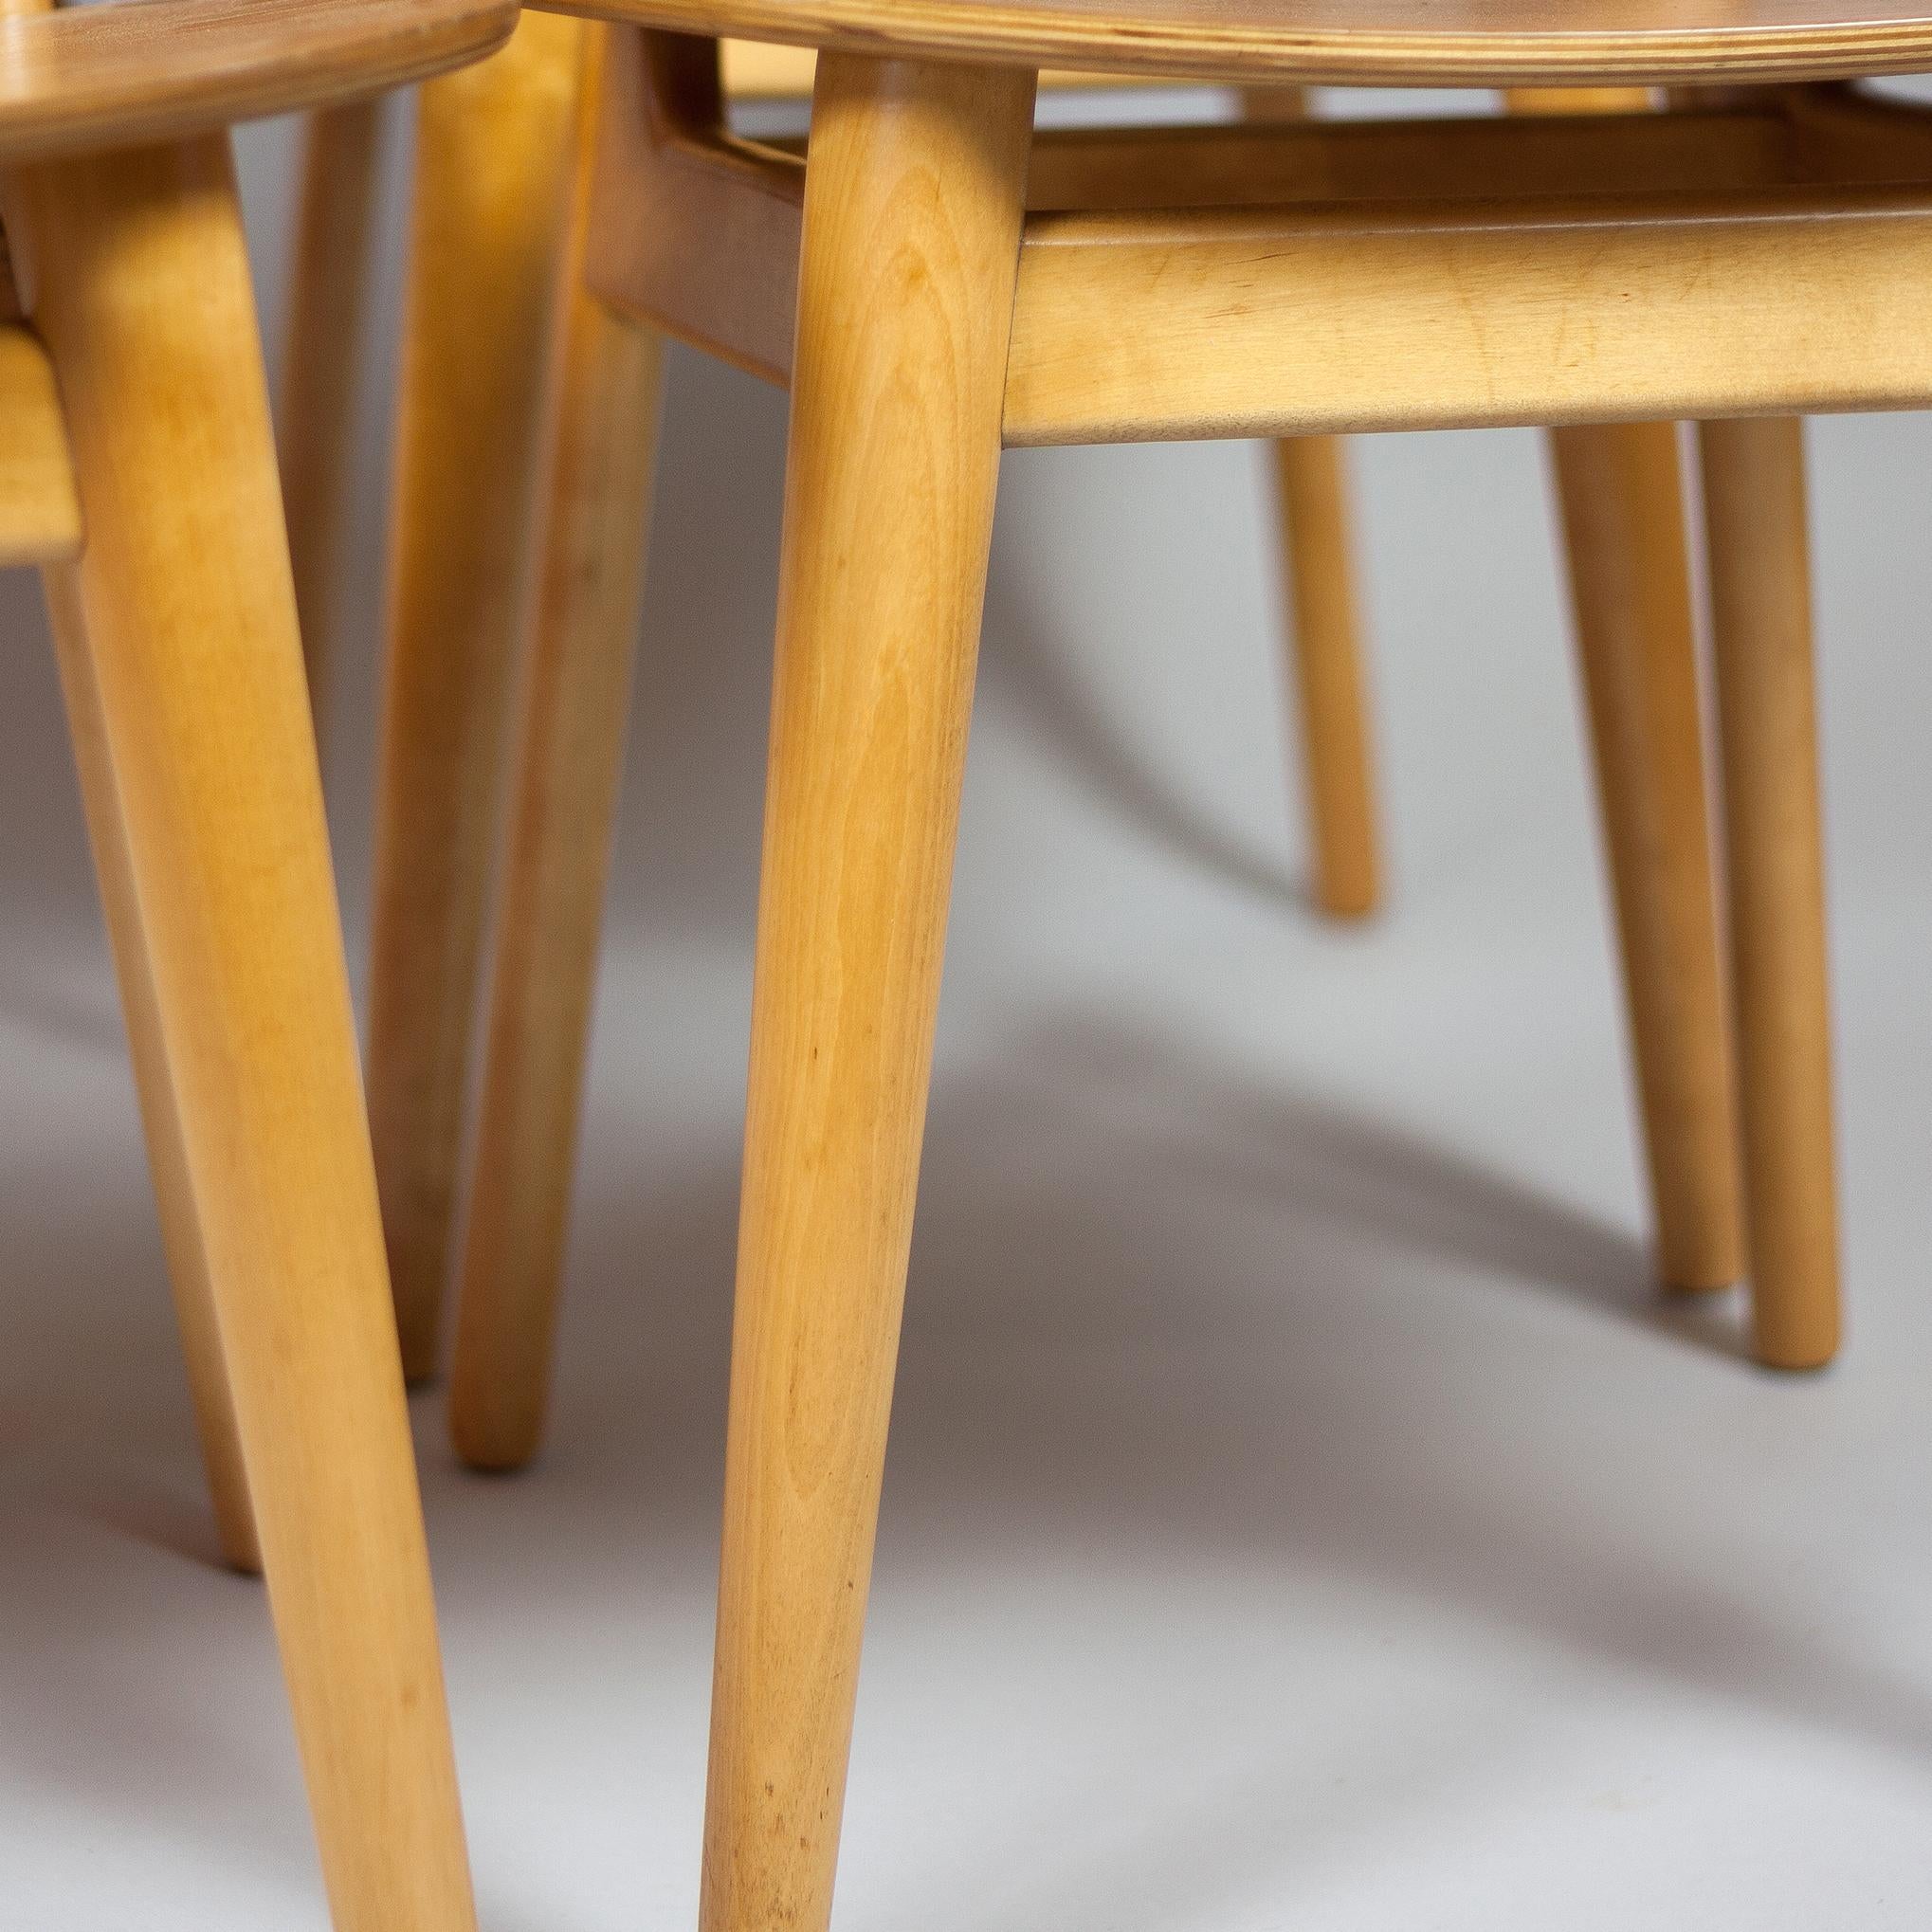 SB11 Cees Braakman Dining Chairs for Pastoe, Maple and Teak, Denmark, 1950s 7